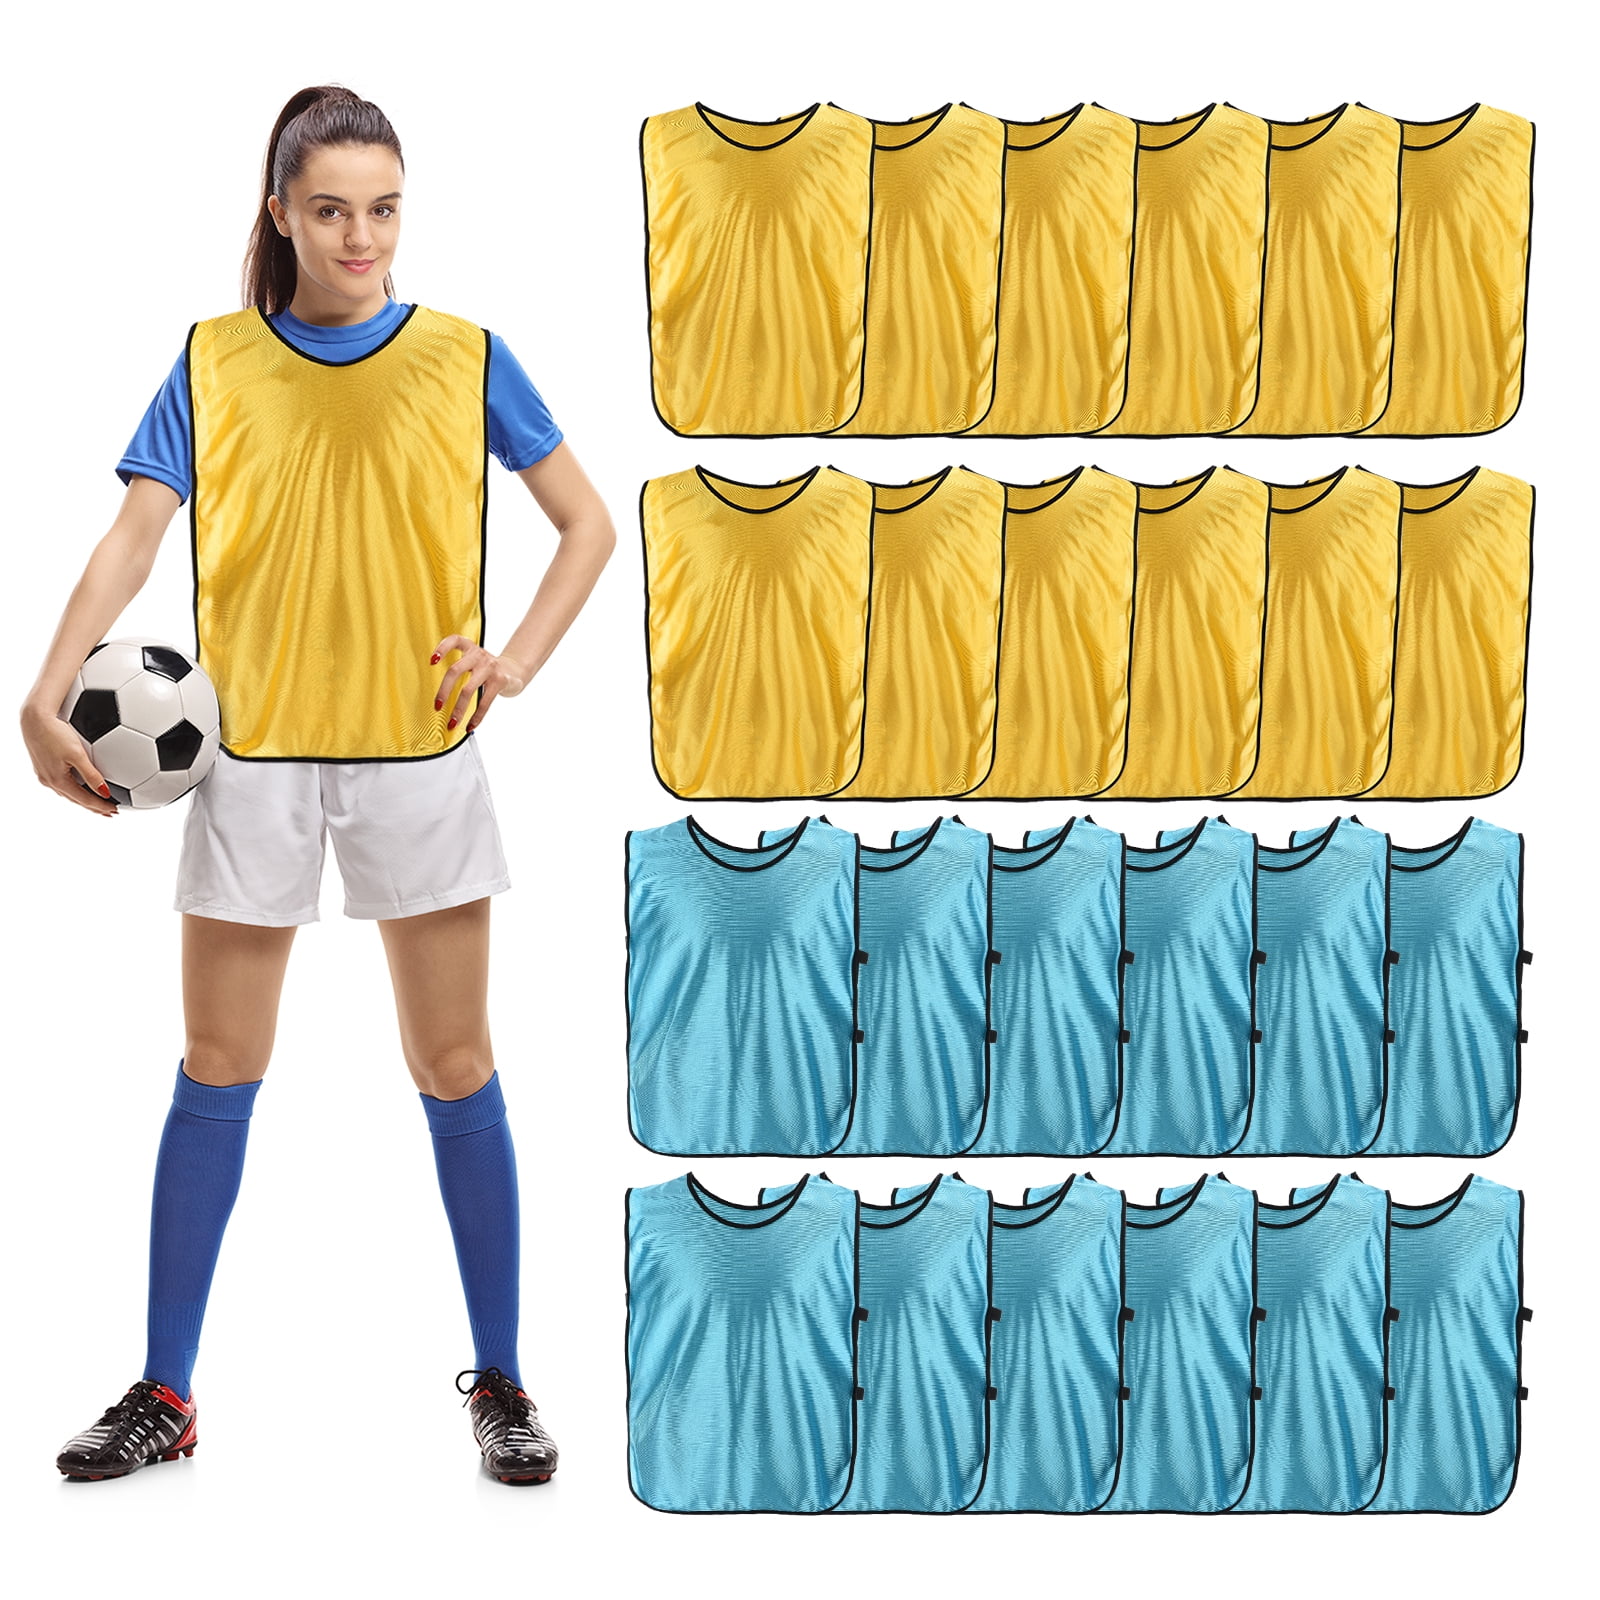 24 Pack Soccer Pinnies Jerseys Football Scrimmage Vest Basketball Practice Jersey Volleyball Scrimmage Vests for Adults and Team Children Youth